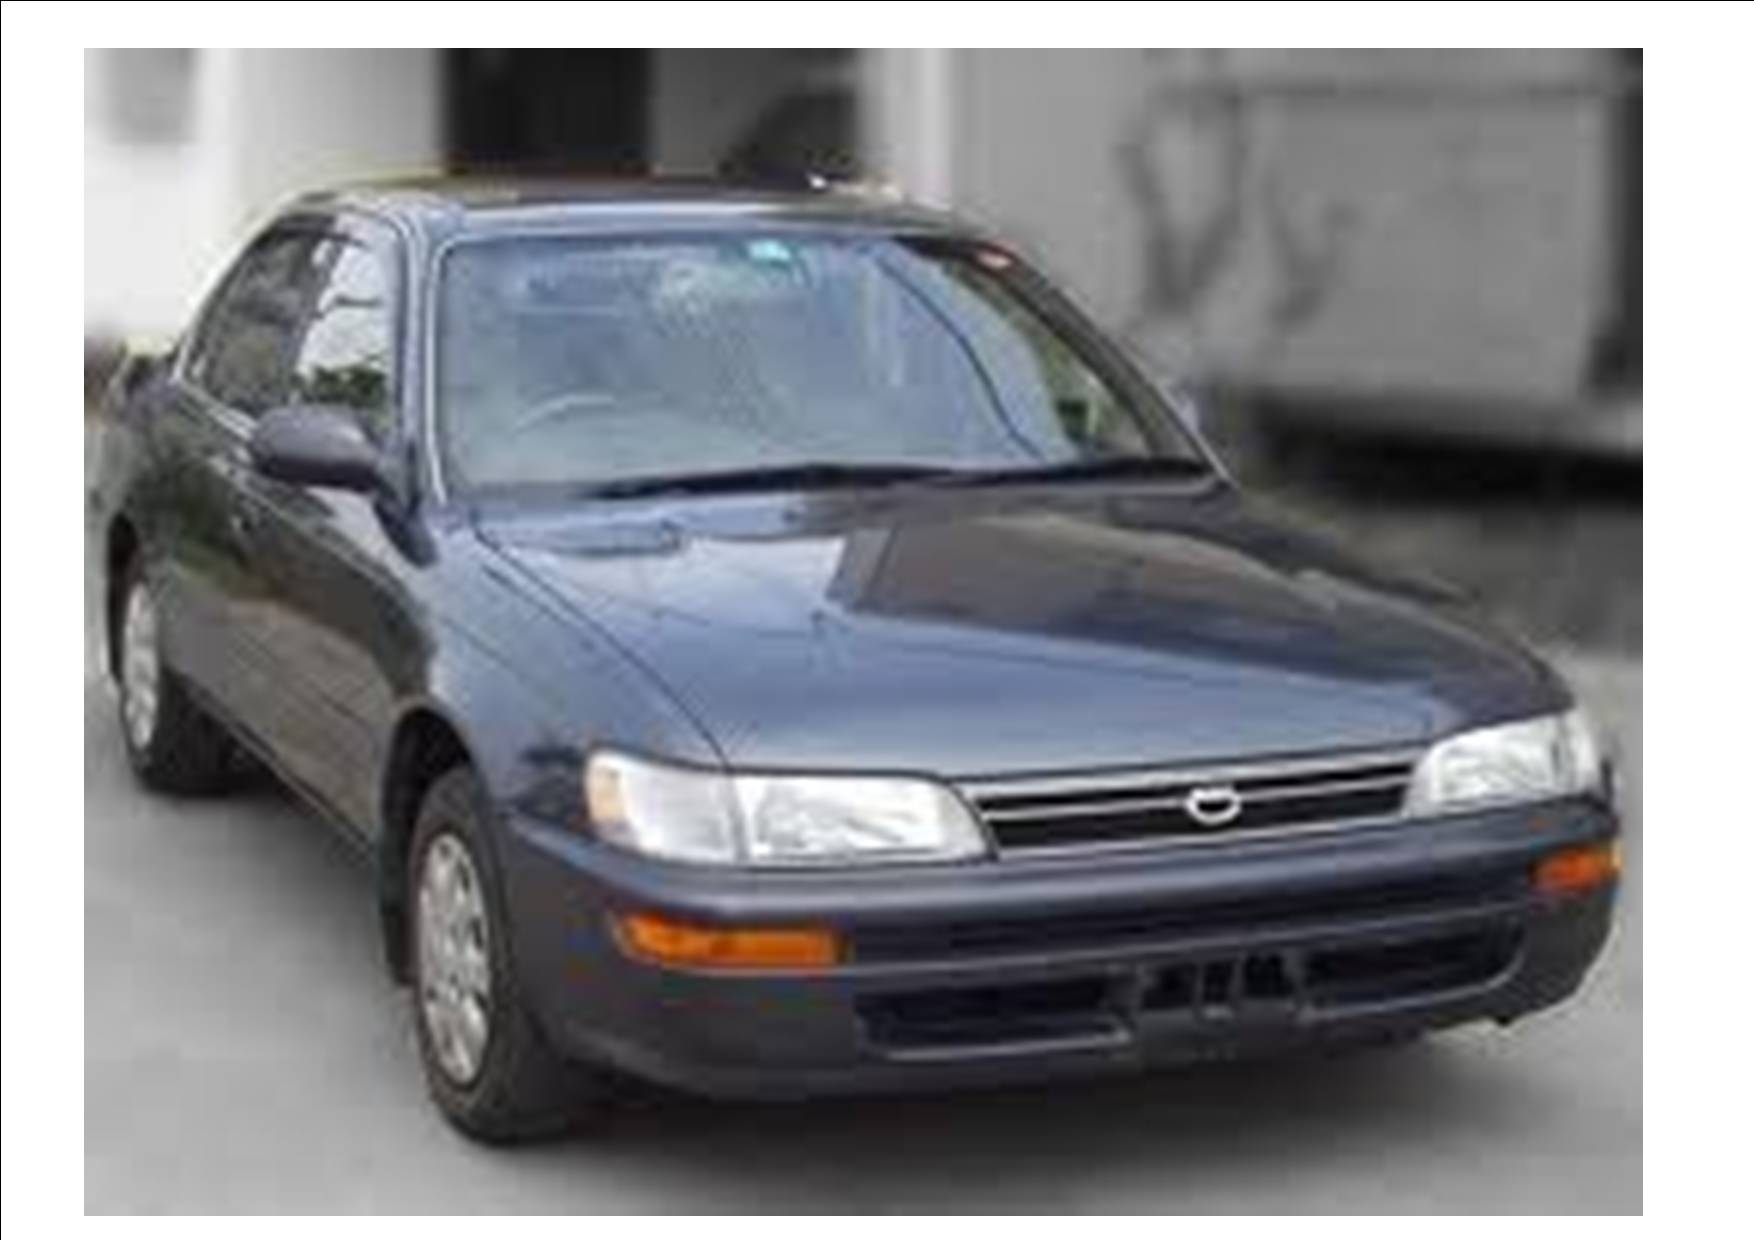 1994 toyota corolla aftermarket parts #6